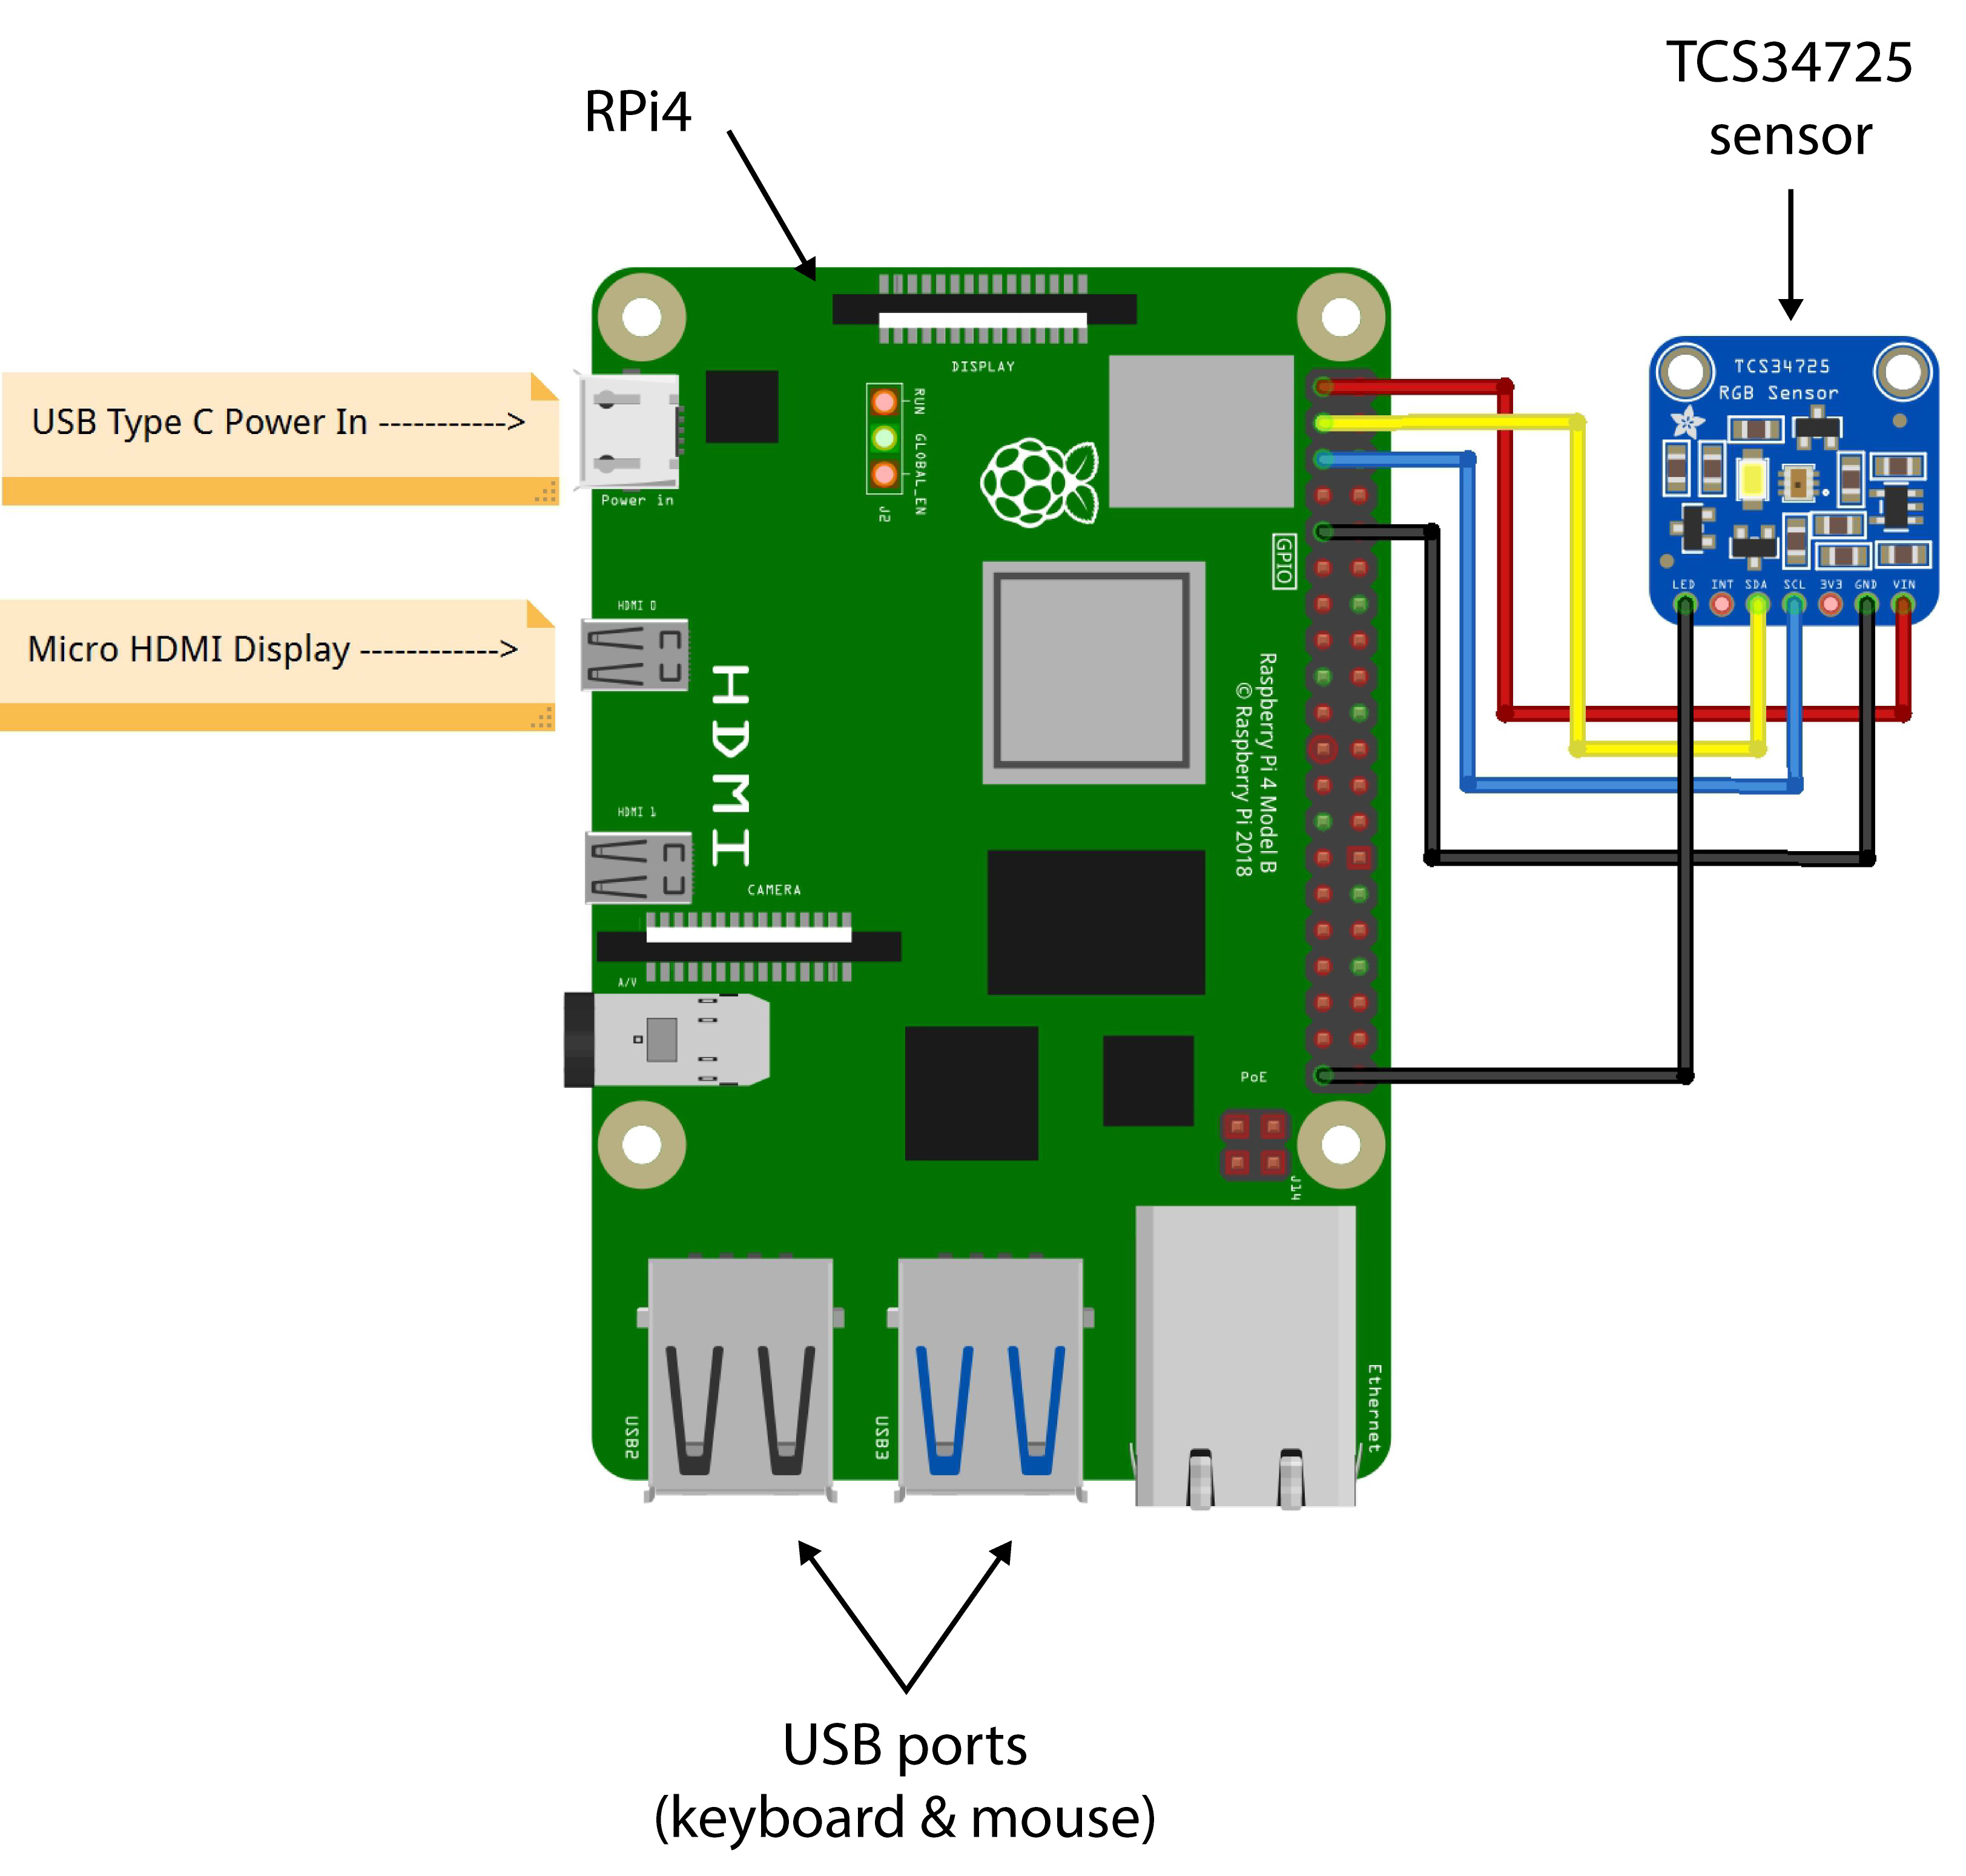 Breadboard level connections of RPi4 and TCS34725.